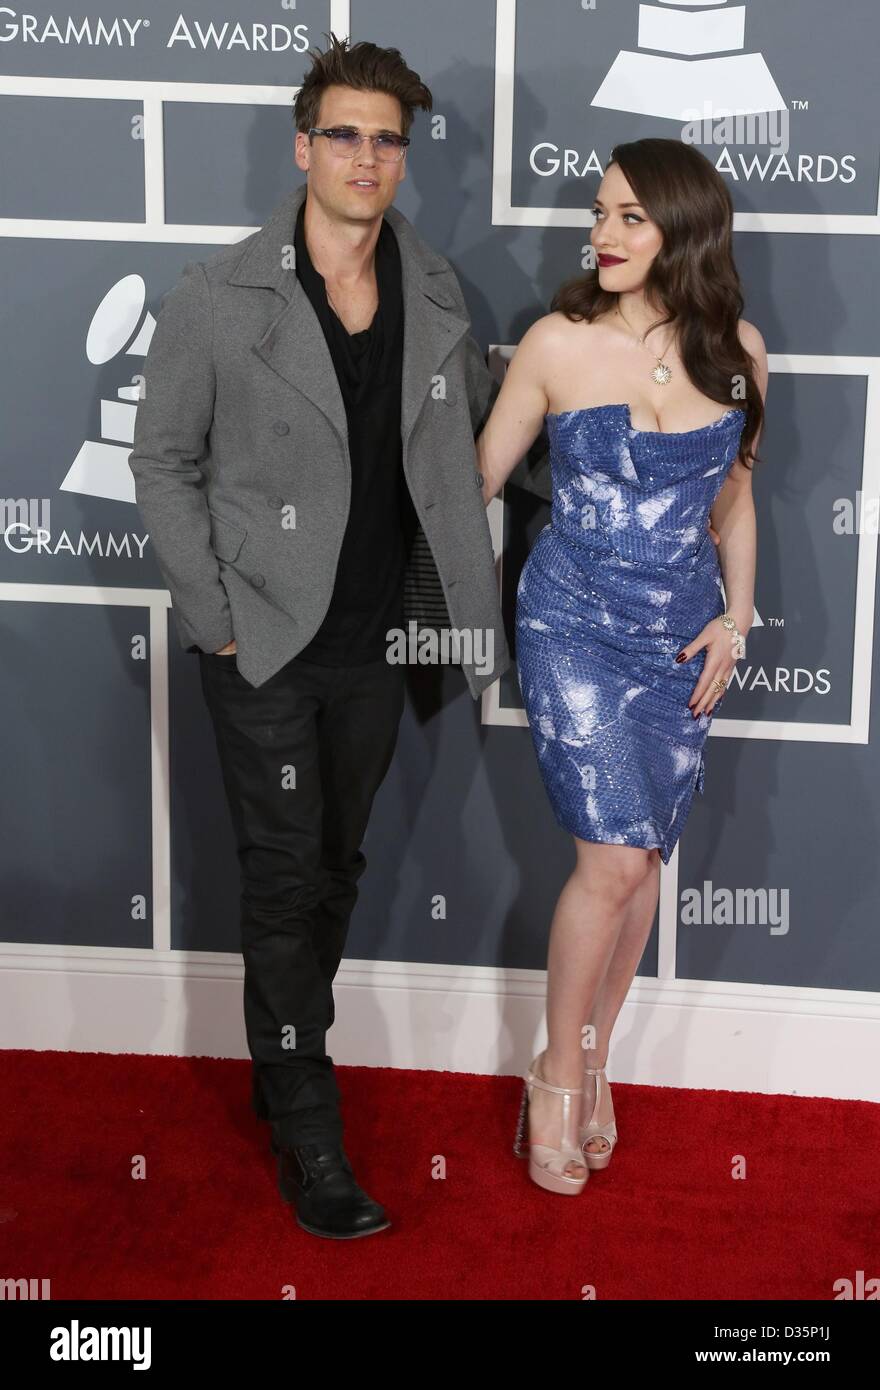 lokalisere band Rejsebureau Los Angeles, California, USA. 10th February 2013. Nick Zano, Kat Dennings  at arrivals for The 55th Annual Grammy Awards - ARRIVALS, STAPLES Center,  Los Angeles, CA February 10, 2013. Photo By: Jef